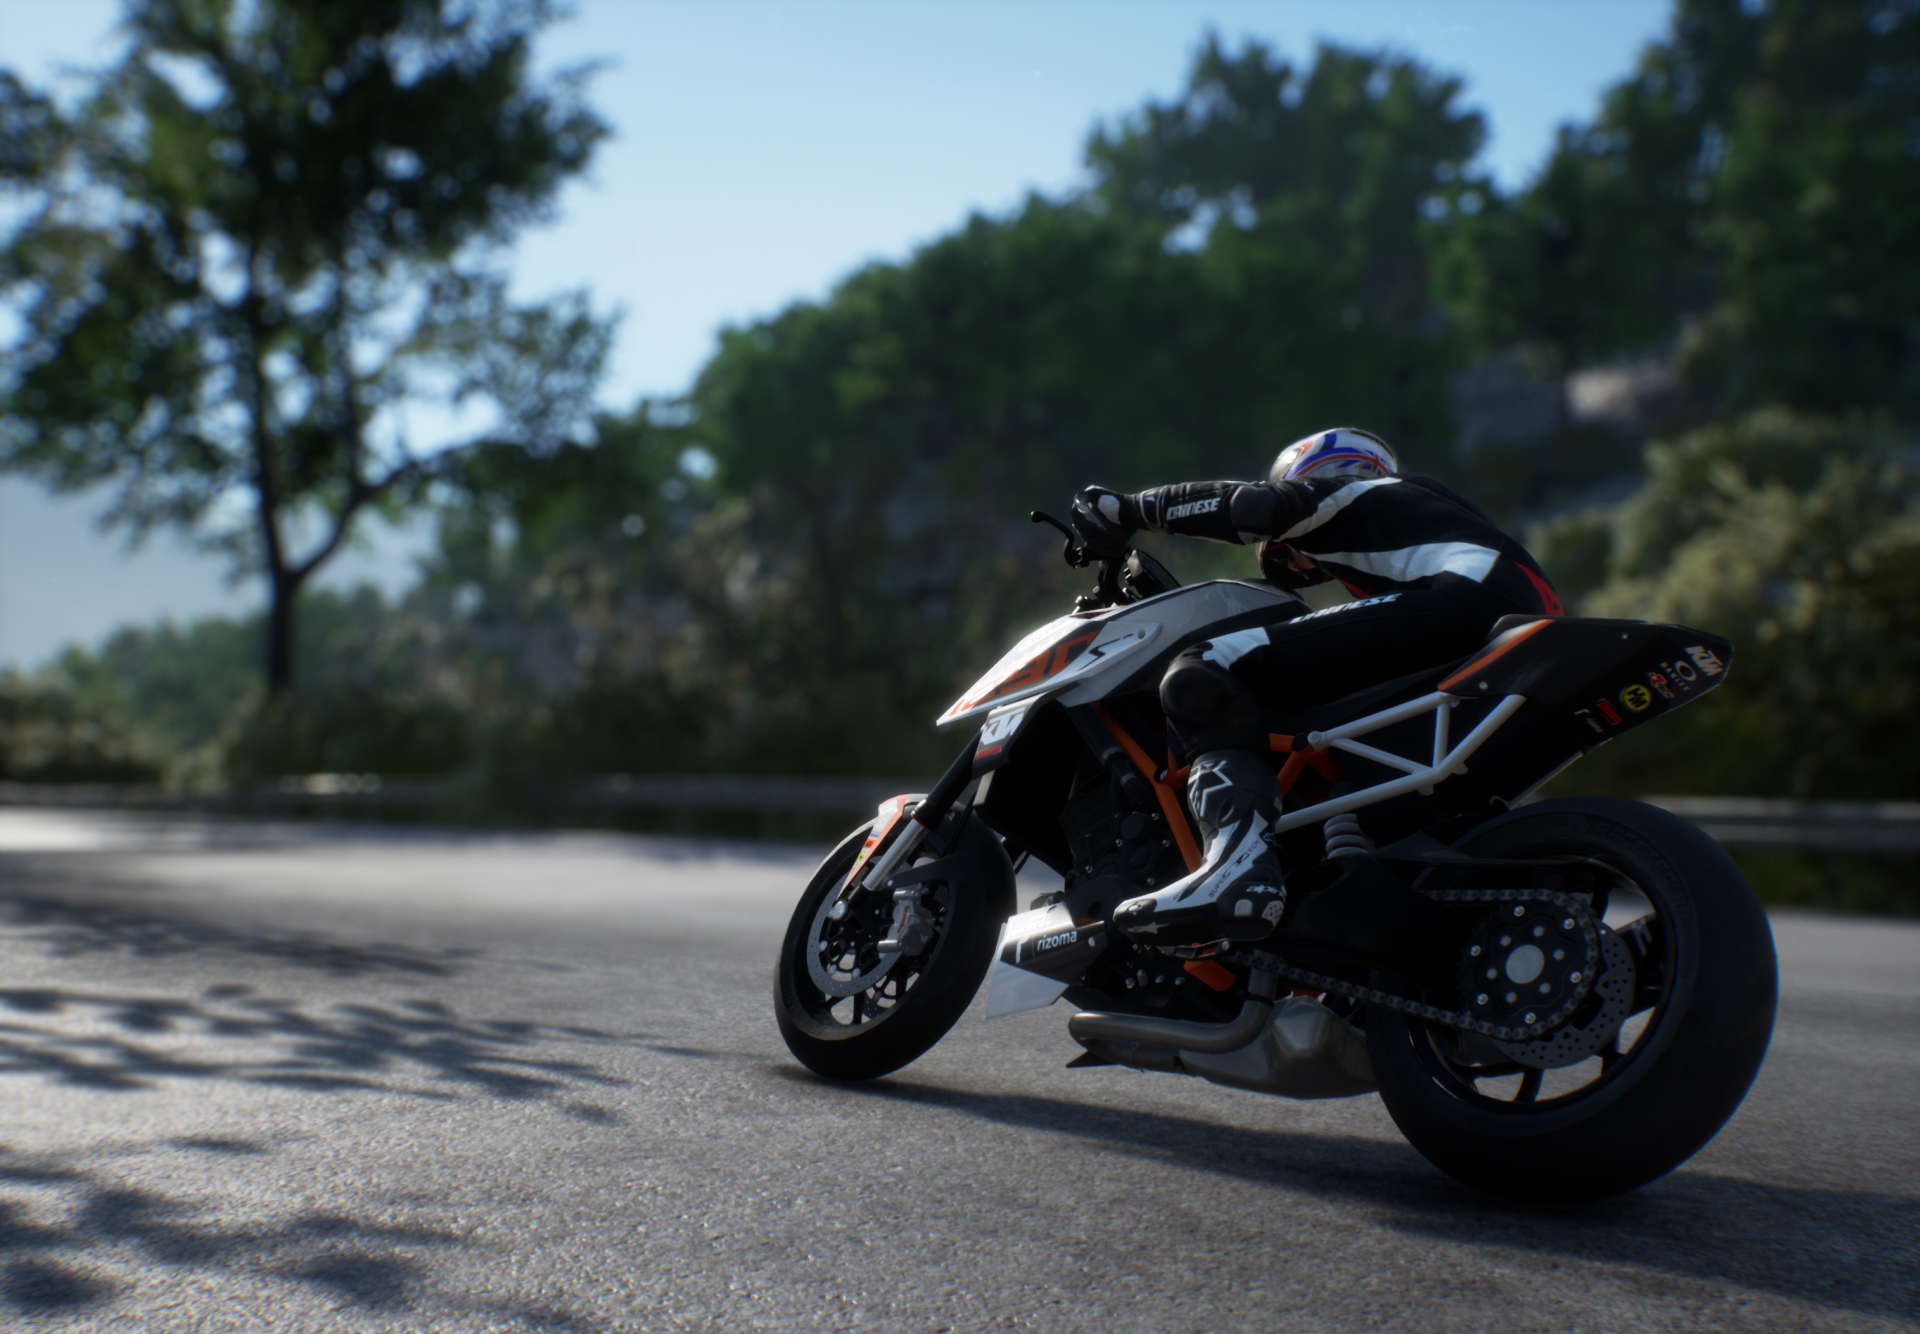 RIDE 3 PS4 Review #30